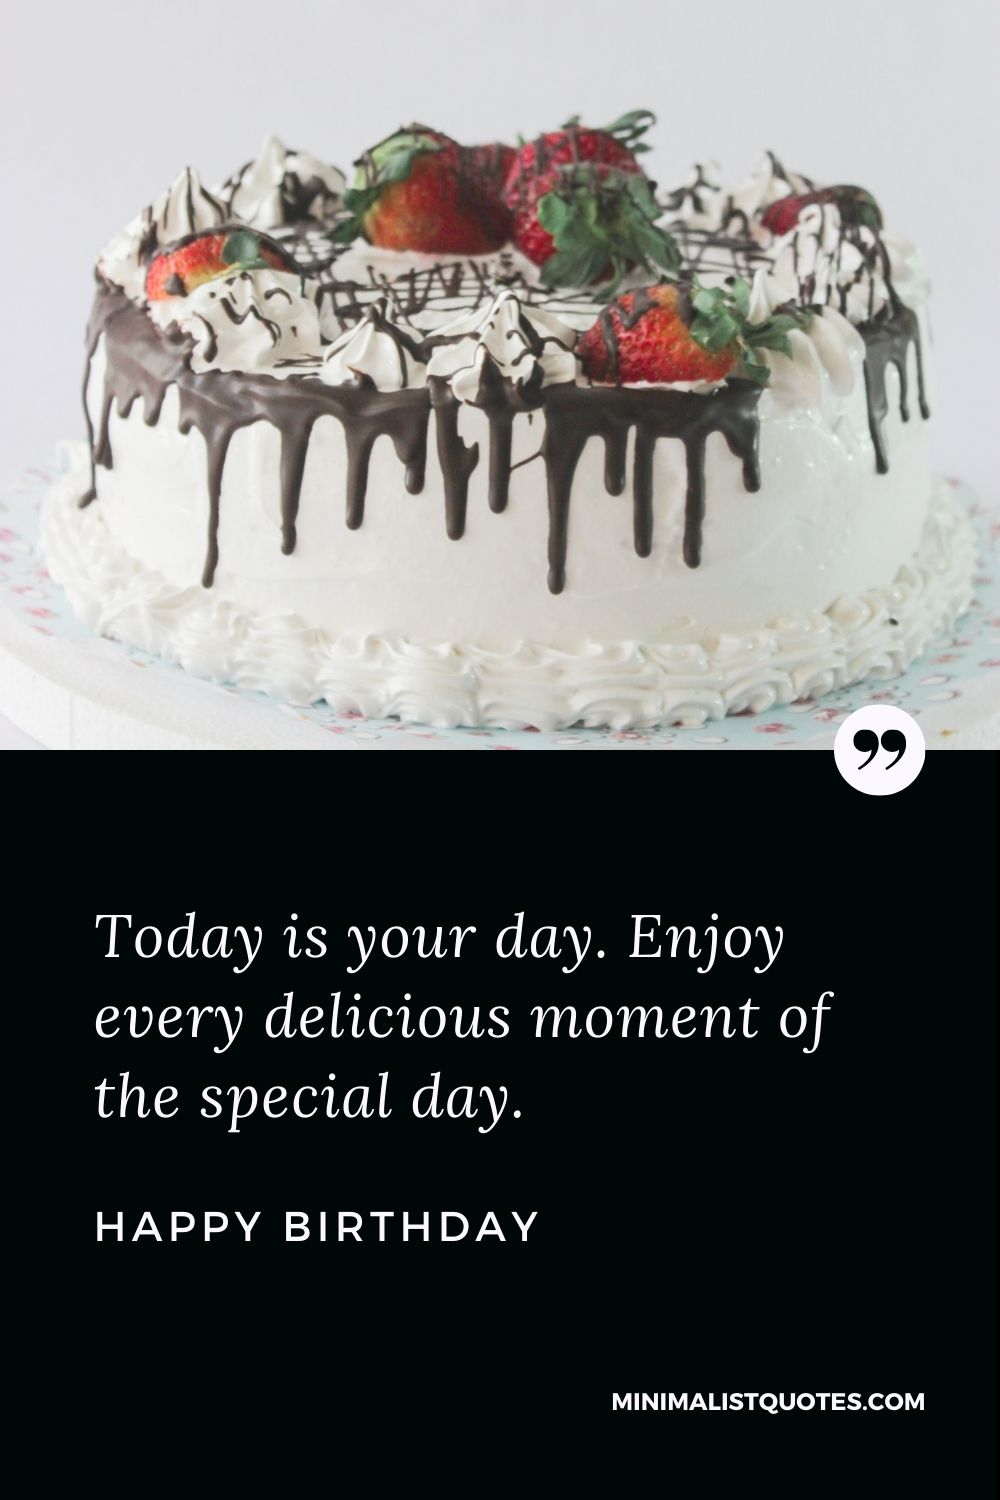 Happy Birthday Wishes - Today is your day. Enjoy every delicious moment of the special day.